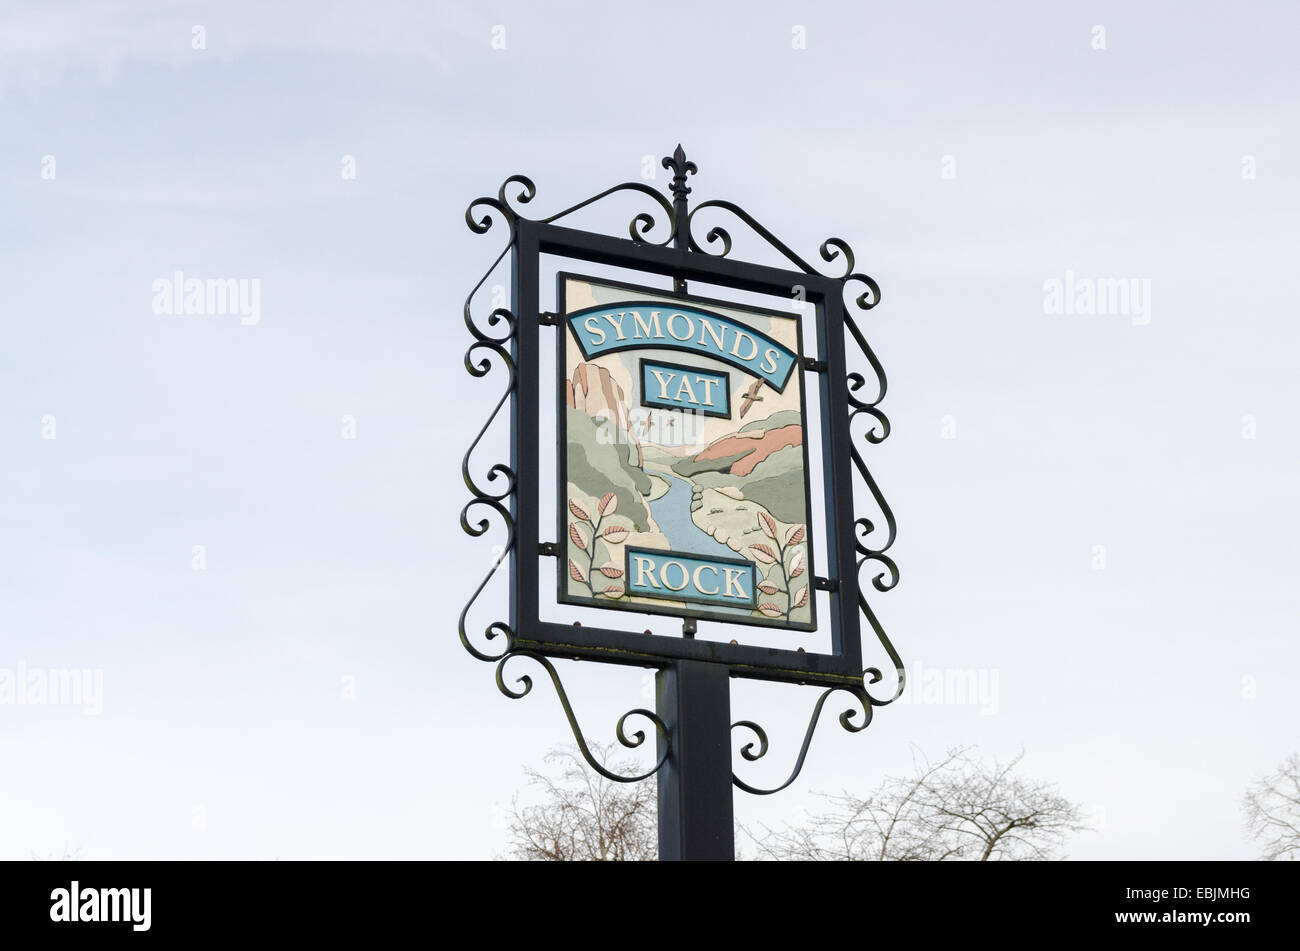 Traditional sign for Symonds Yat Rock on Gloucestershire Stock Photo